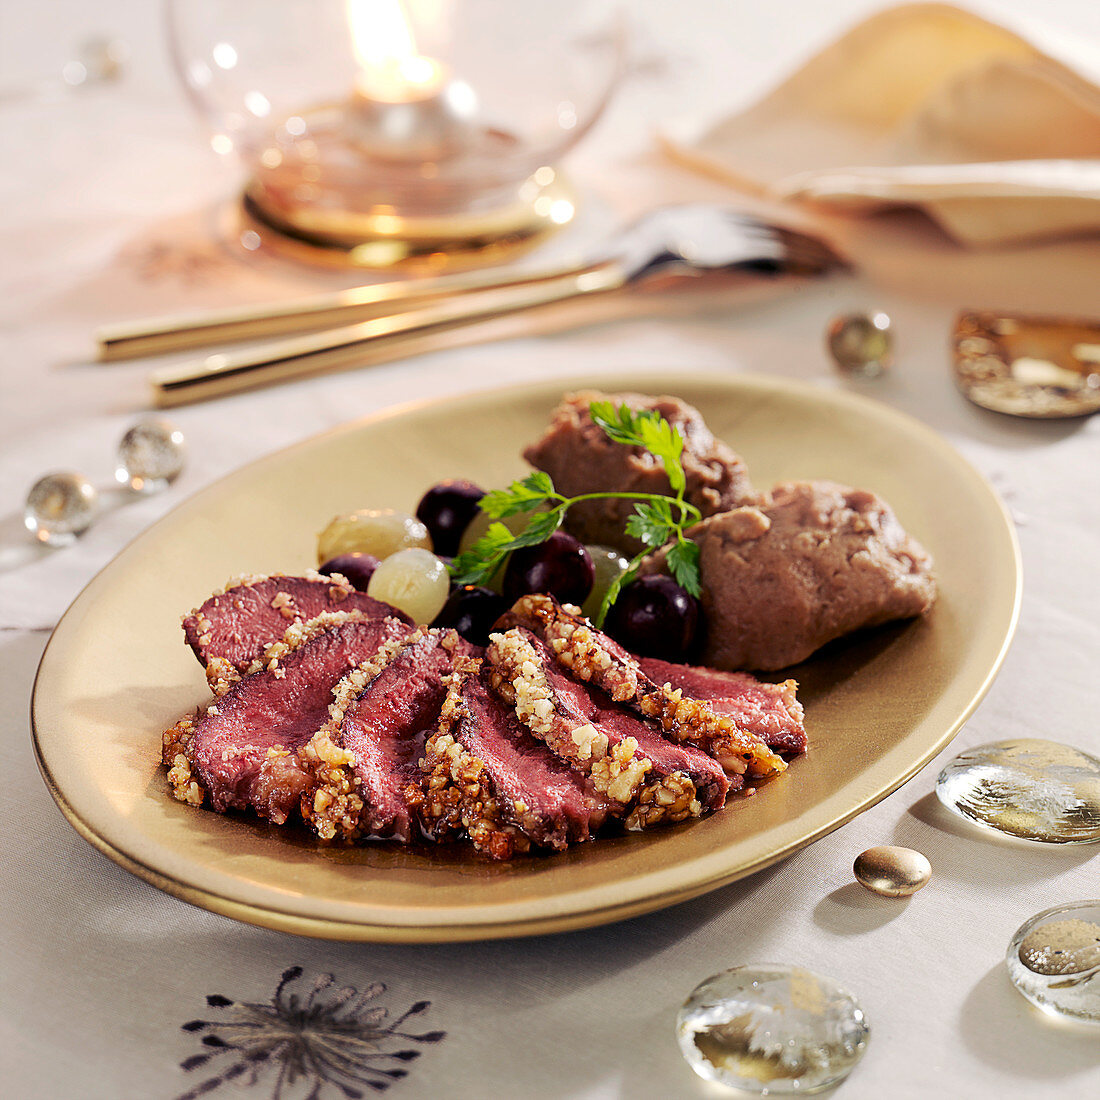 Magrets de canard in walnut crust, grapes and chestnut puree